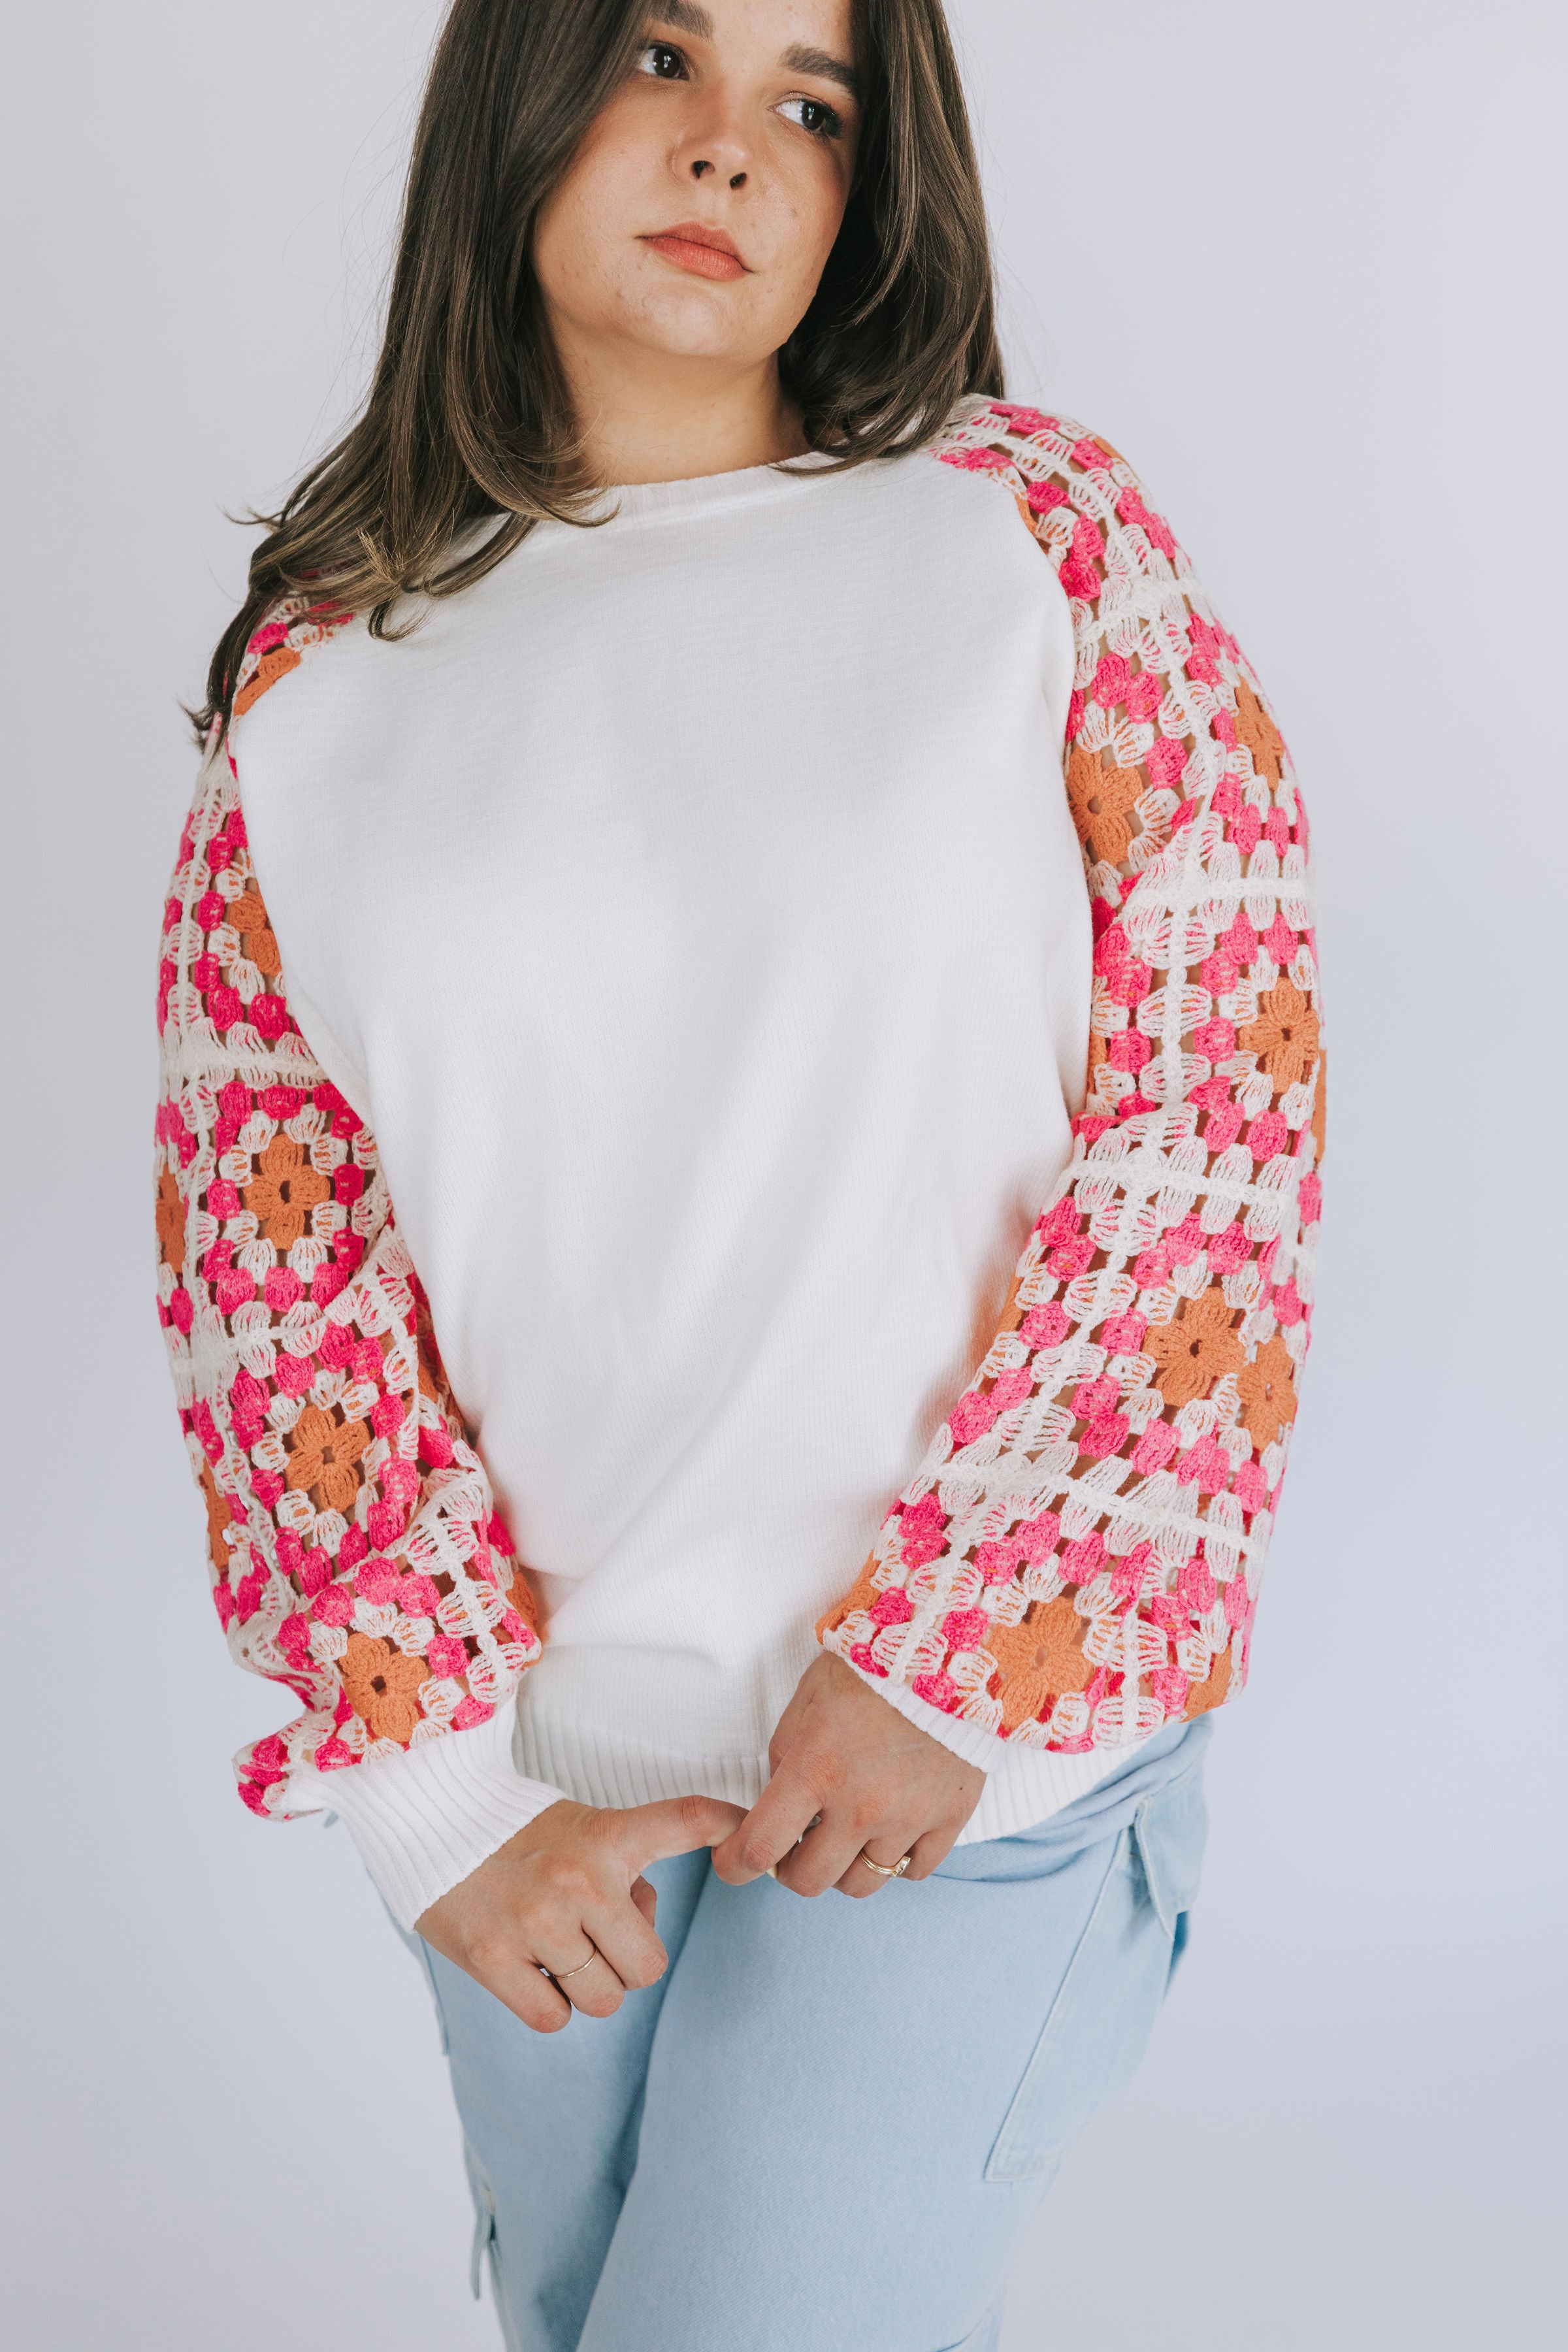 PLUS SIZE - Love Boldly Sweater